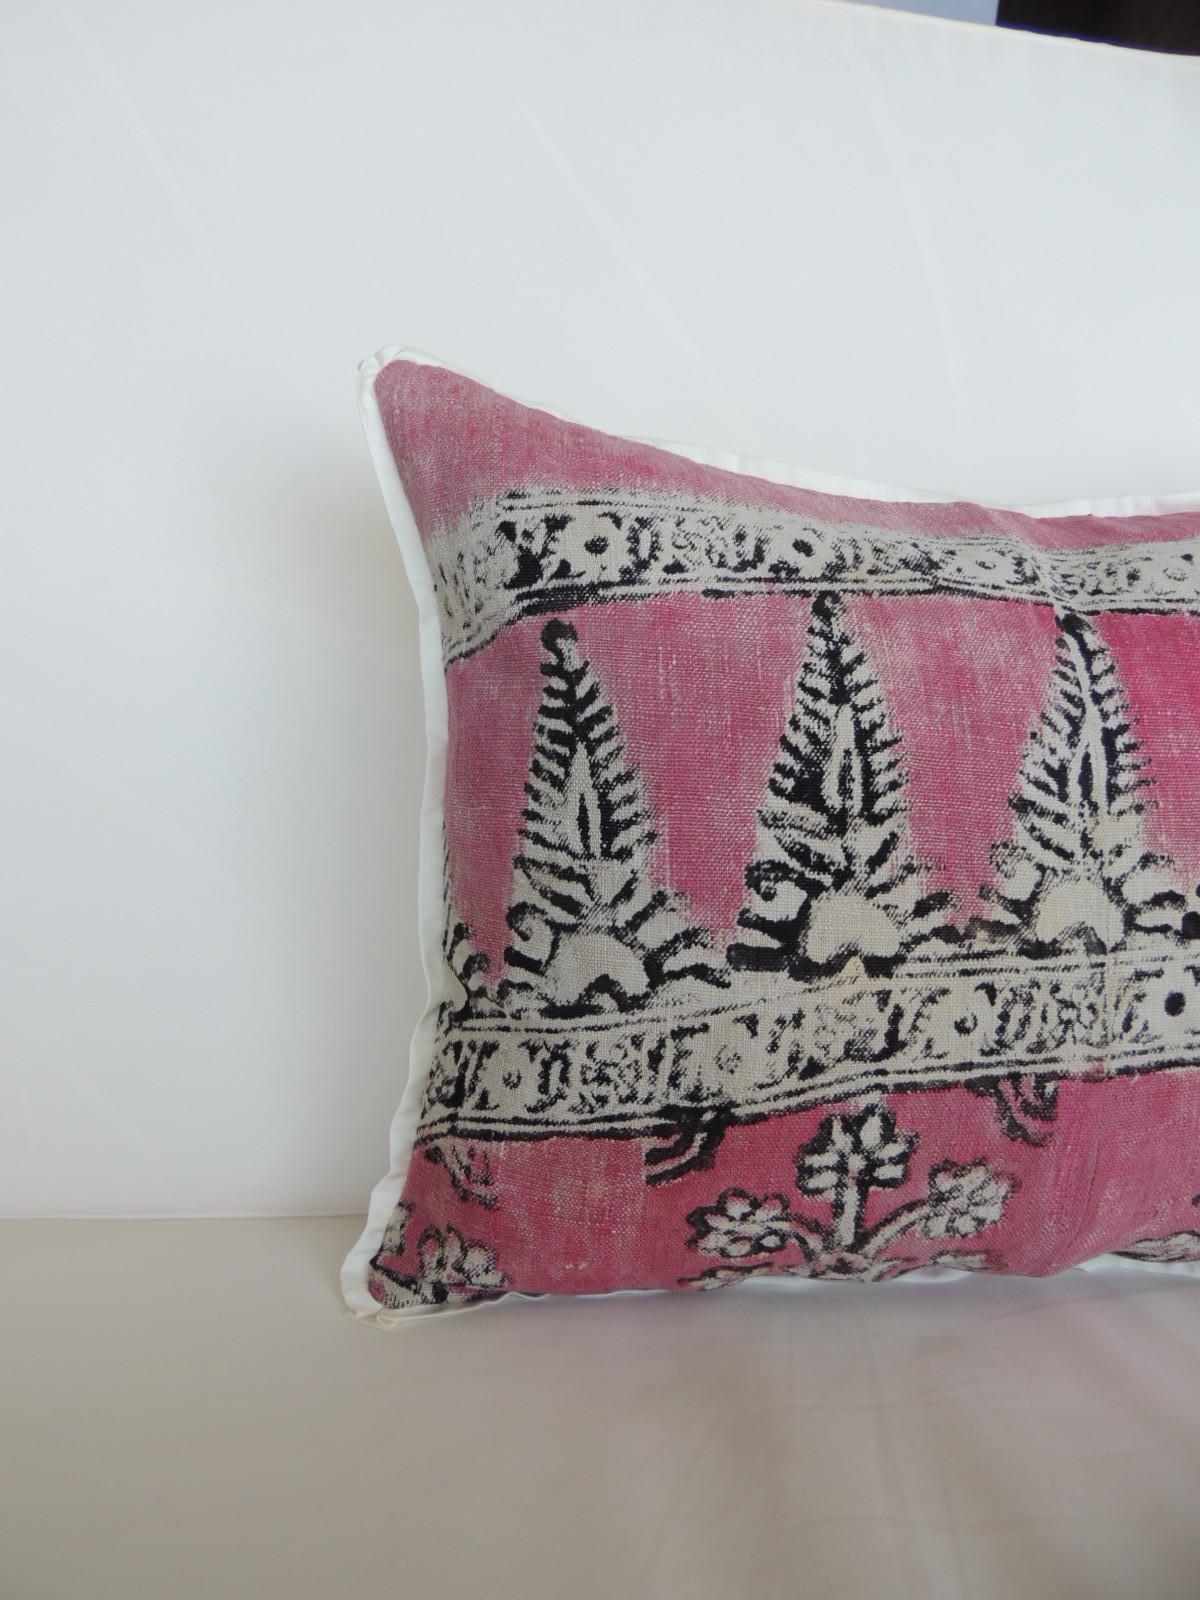 Vintage pink and black hand blocked bolster decorative pillow.
Petite pink and black Indian pillow with oyster color linen backing and cream color flat silk trim all around.
Decorative pillow handcrafted and designed in the USA.
Closure by stitch